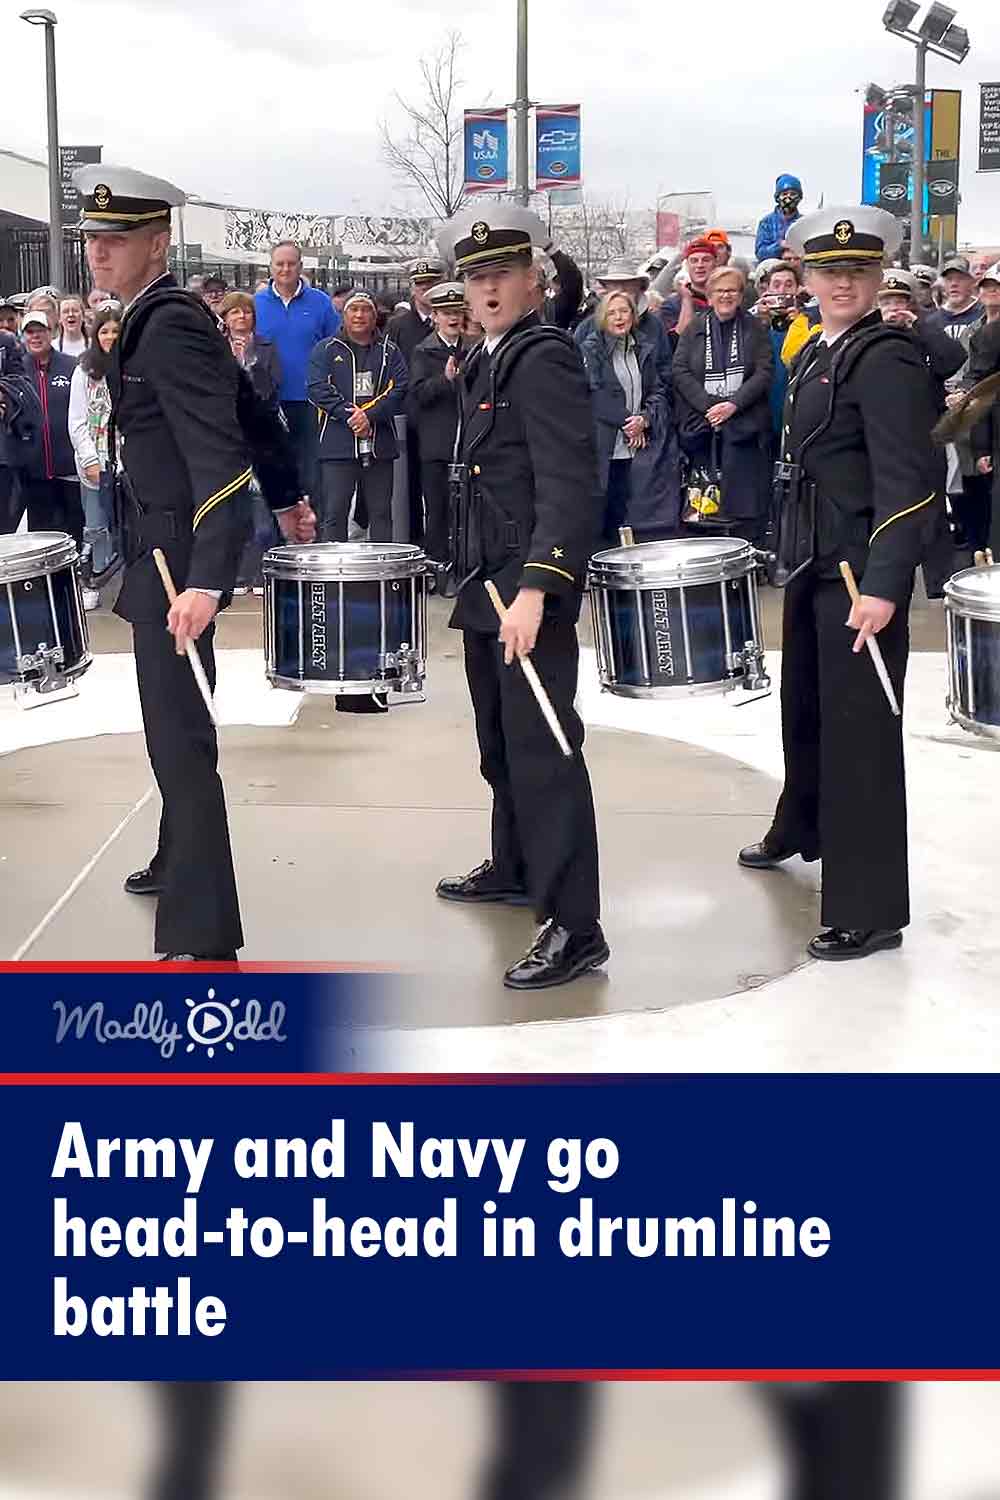 Army and Navy go head-to-head in drumline battle